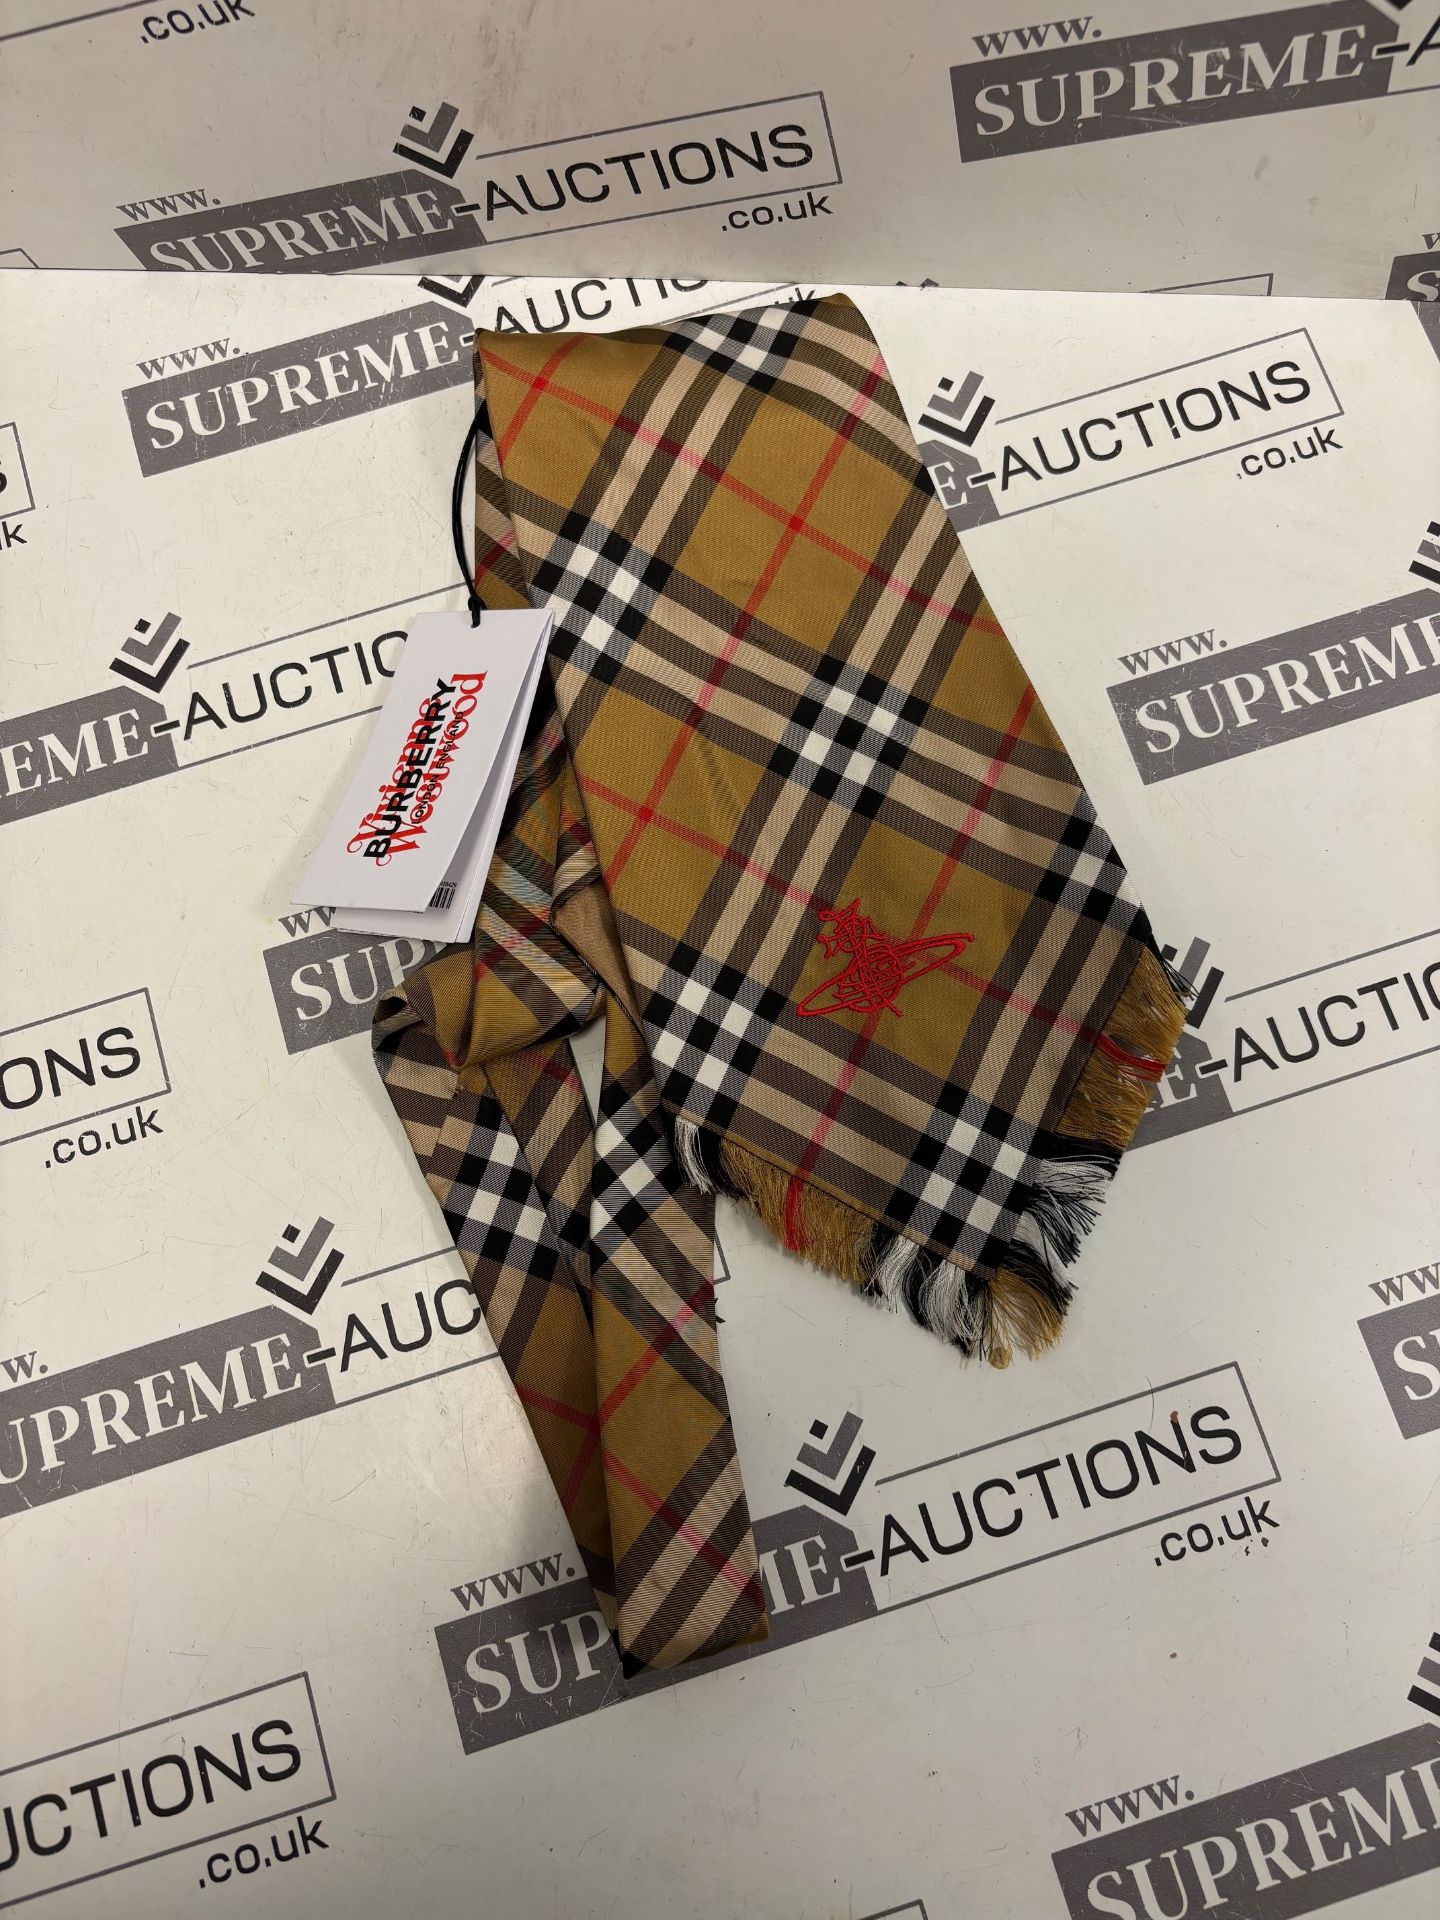 (No Vat) Burberry Vivienne Westwood Collaboration Large Retro Tie. With tags! - Image 3 of 3